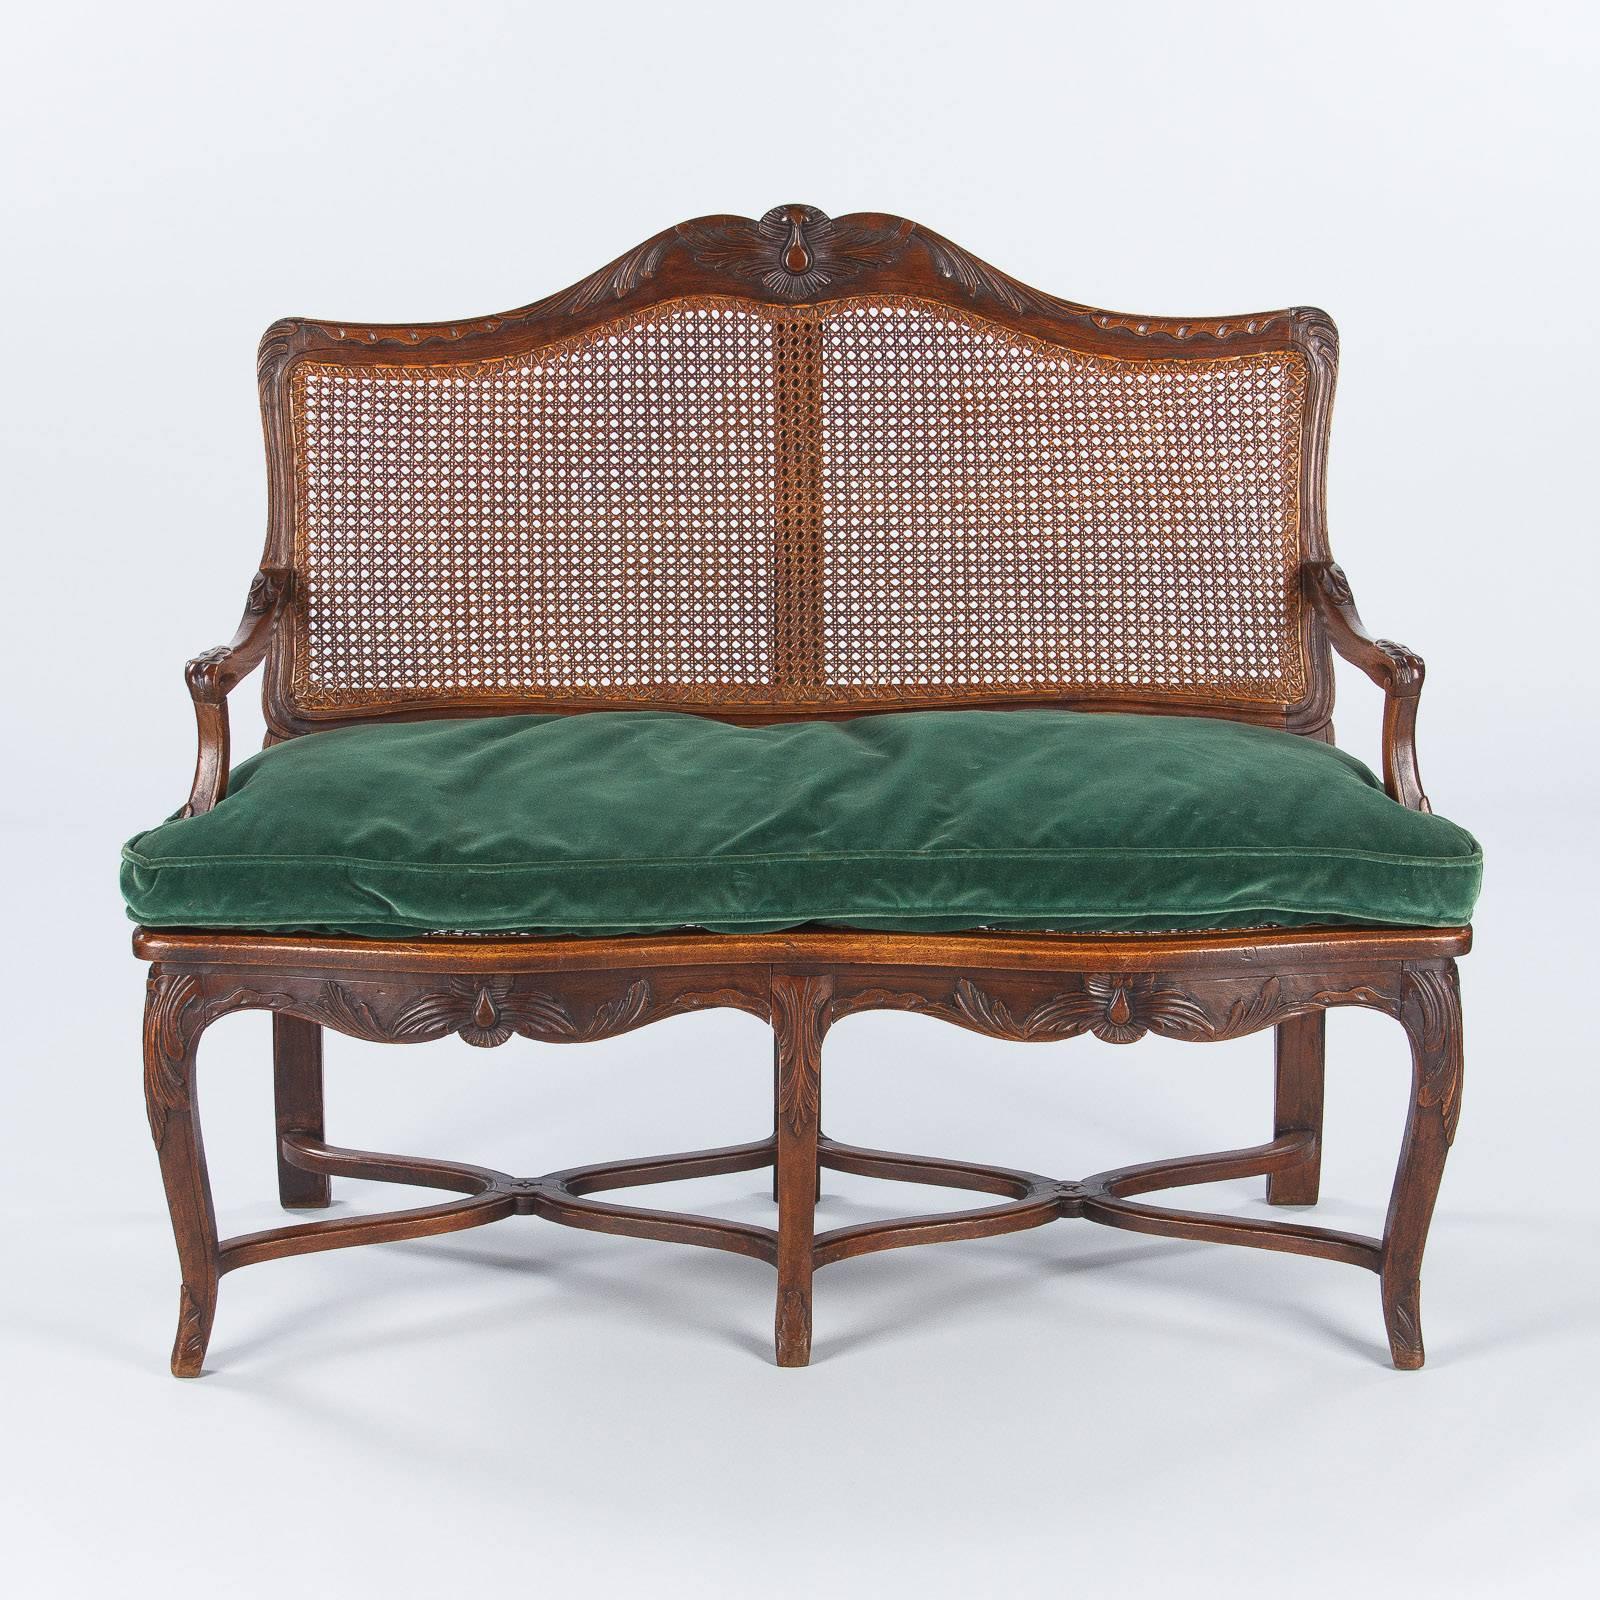 A very attractive caned bench with a walnut frame made in the Louis XV Style, circa 1900s. The bench features an arched back, curved armrests and a scalloped apron with acanthus leaf and shell carved designs. The bench rests on six legs that are